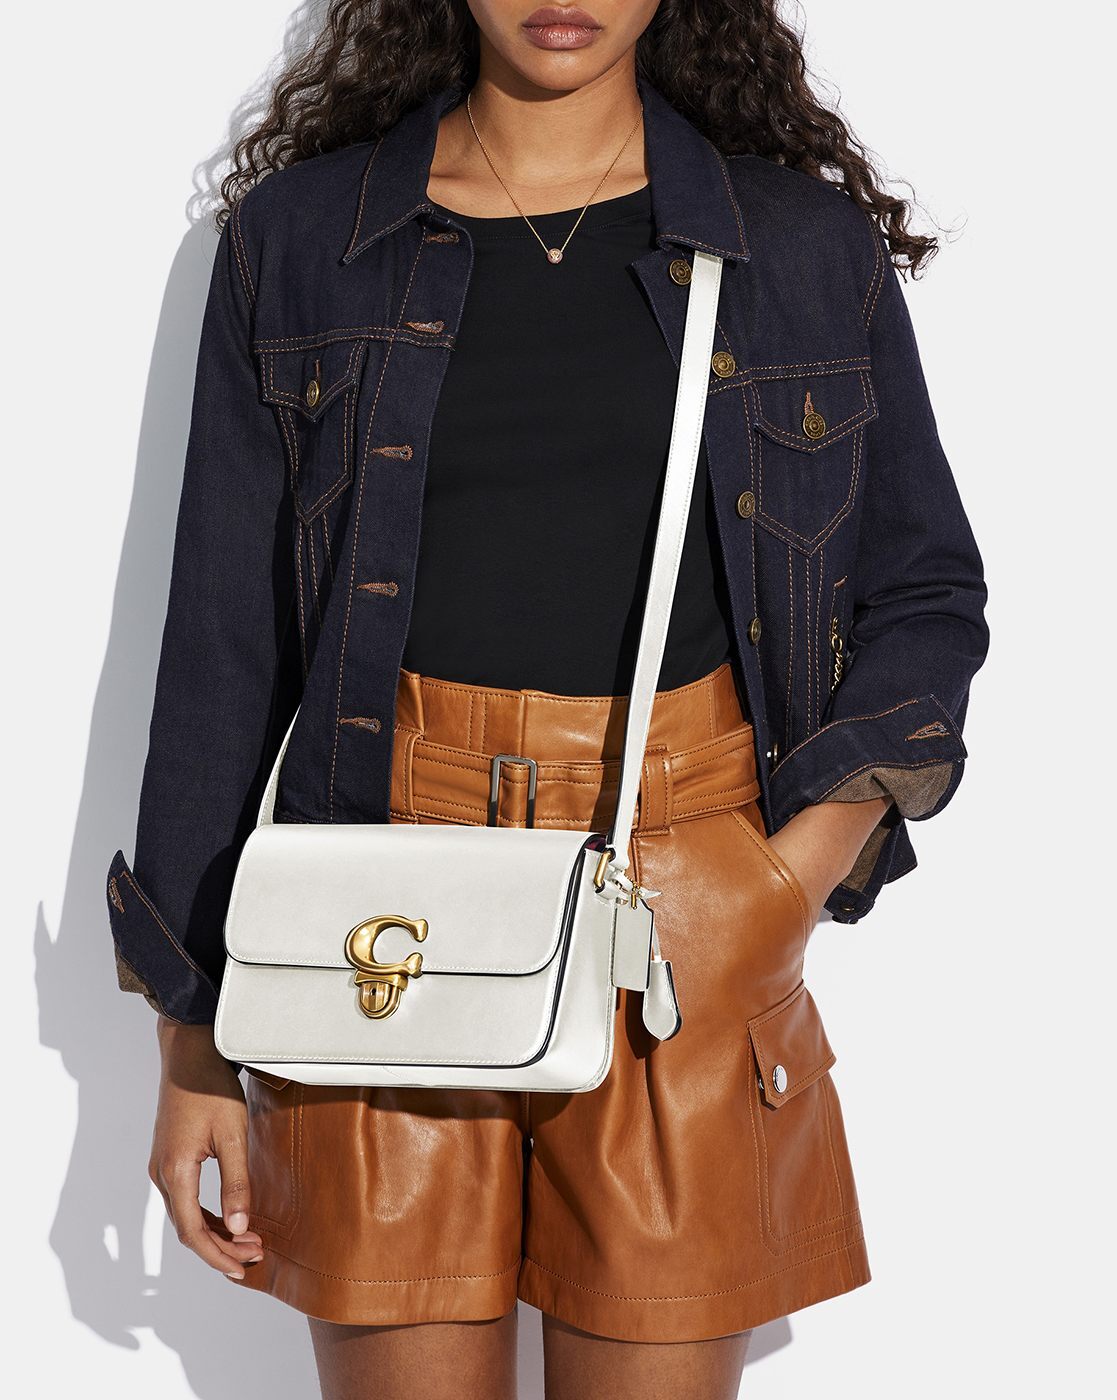 Fashion Look Featuring Coach Shoulder Bags and Club Monaco Earrings by  leftylivinglife - ShopStyle